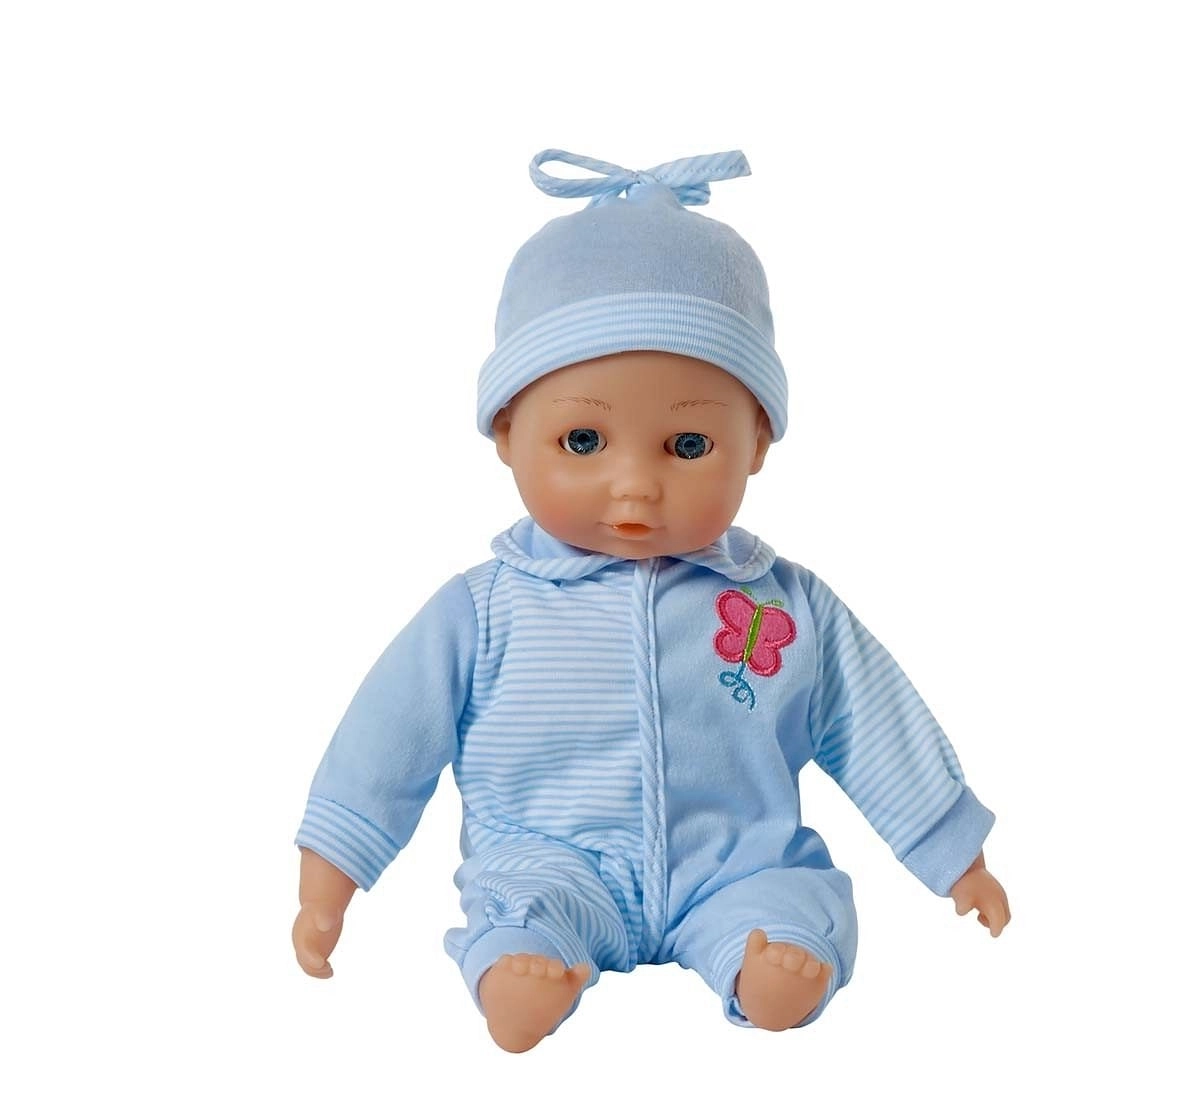 Baby ELLIE 30Cm Sitting Baby, Blue/Pink Dolls & Accessories for age 24M+ 